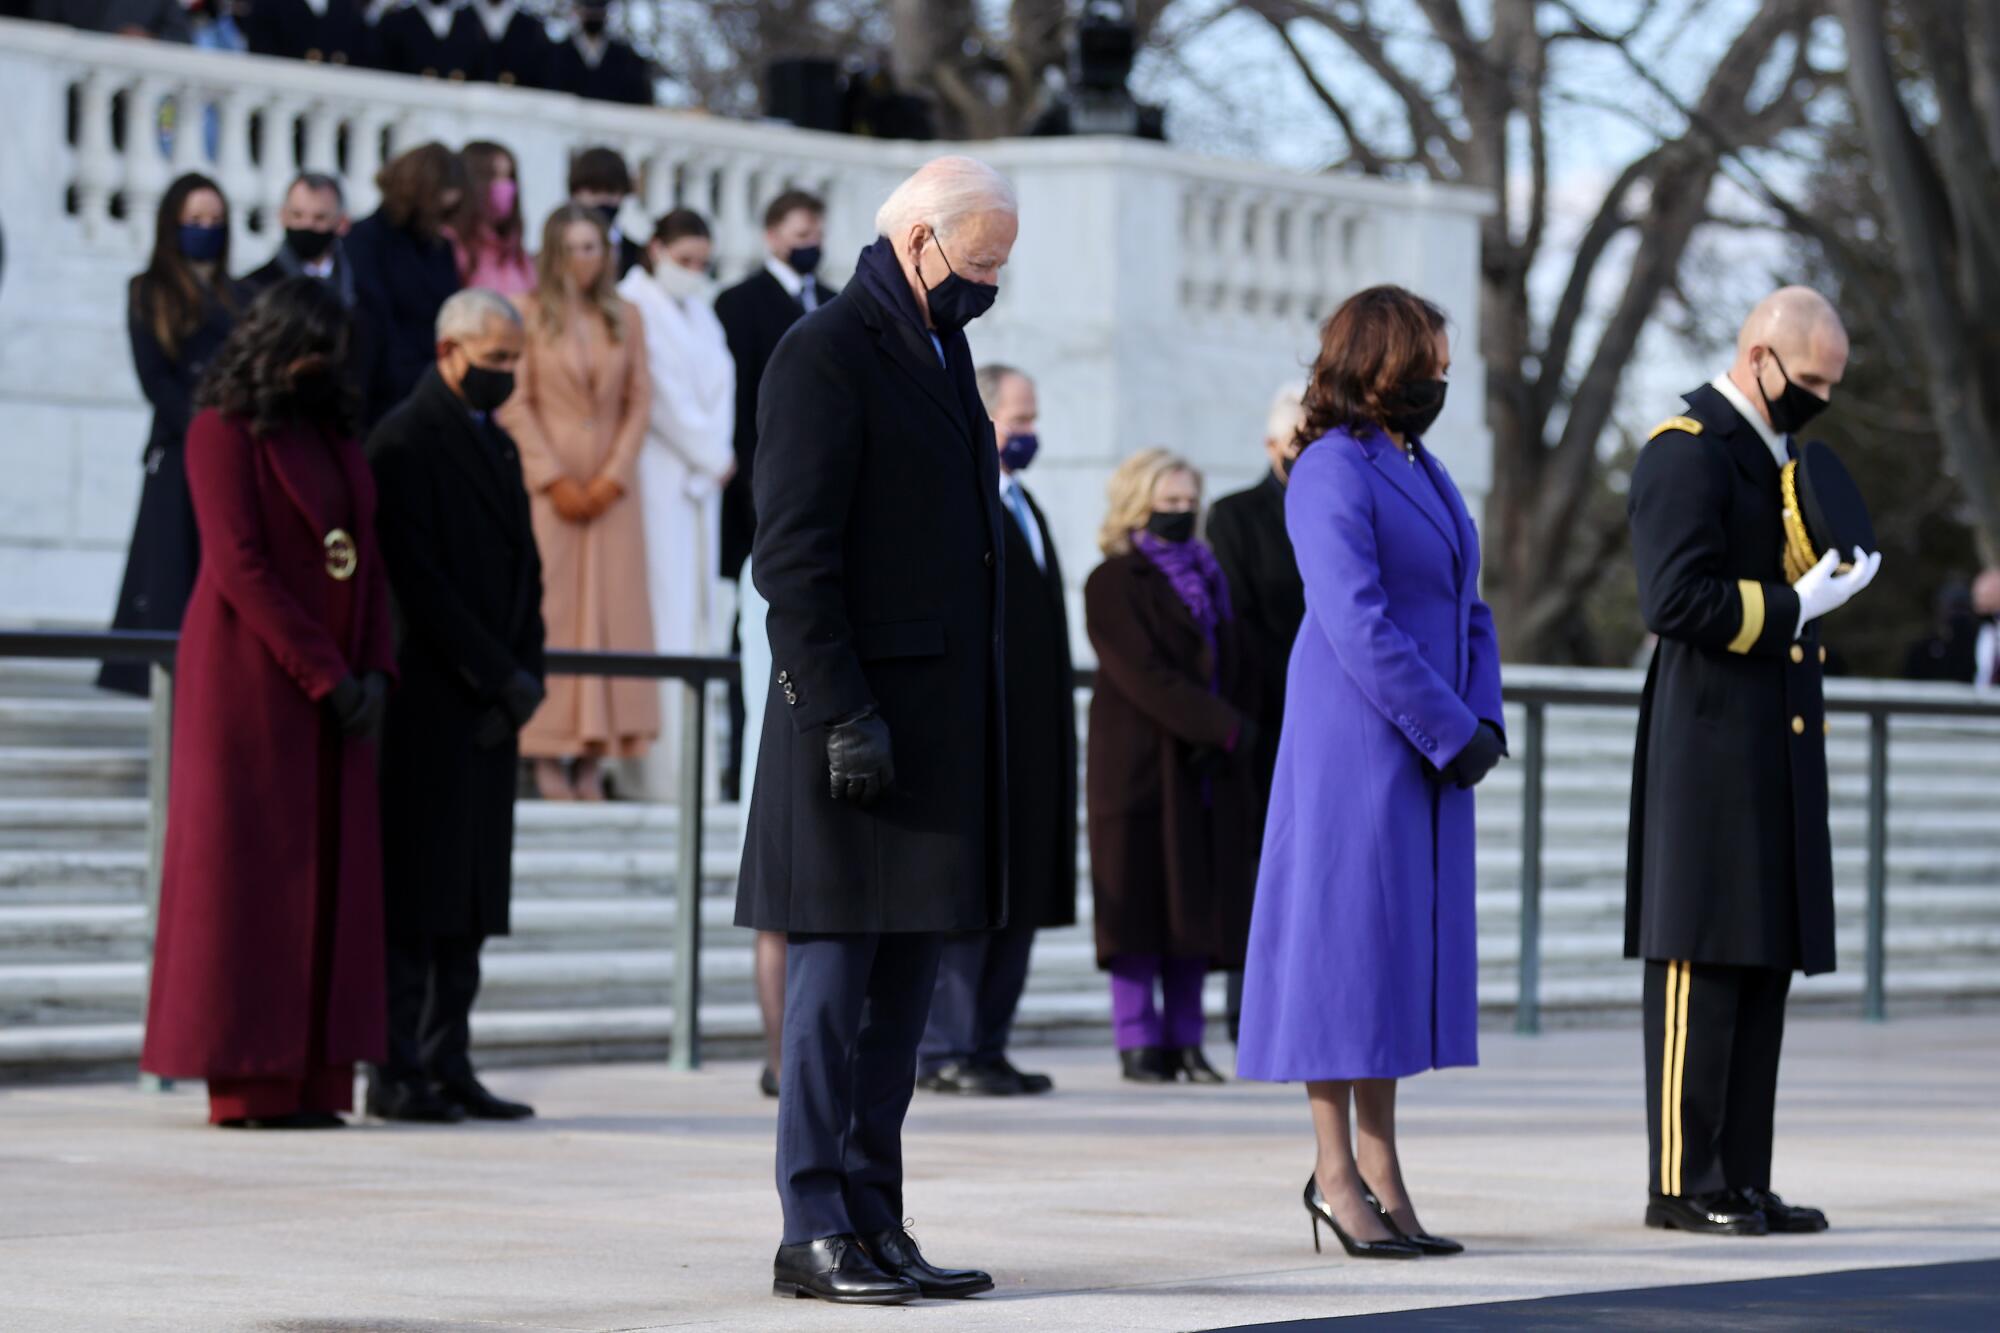 President Biden and Vice President Kamala Harris attend a wreath-laying ceremony at Arlington National Cemetery.